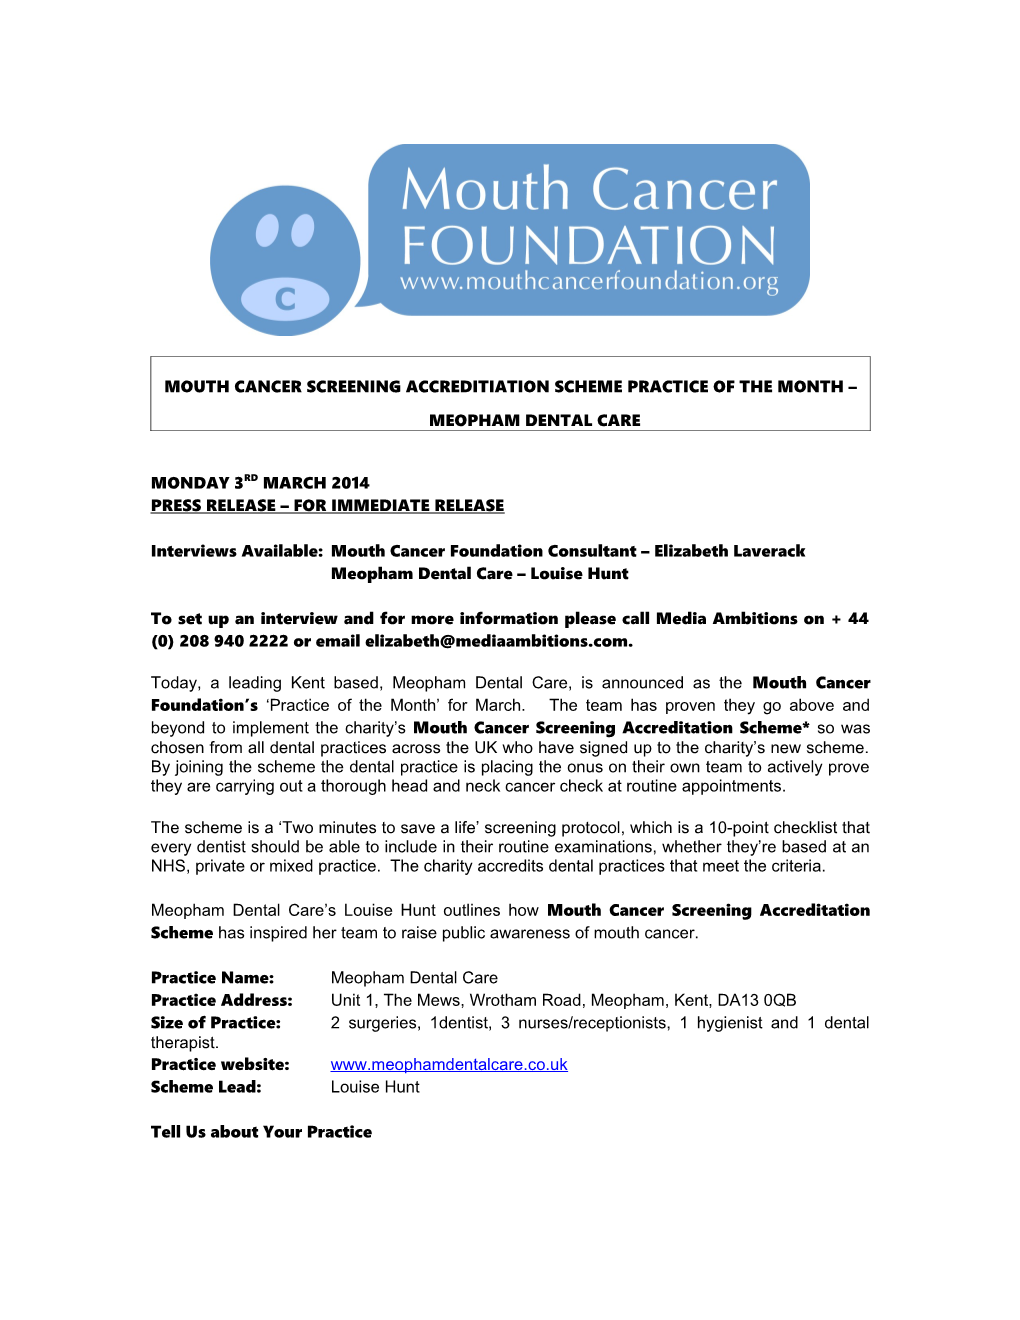 Mouth Cancer Screening Accreditiation Scheme Practice of the Month Meopham Dental Care